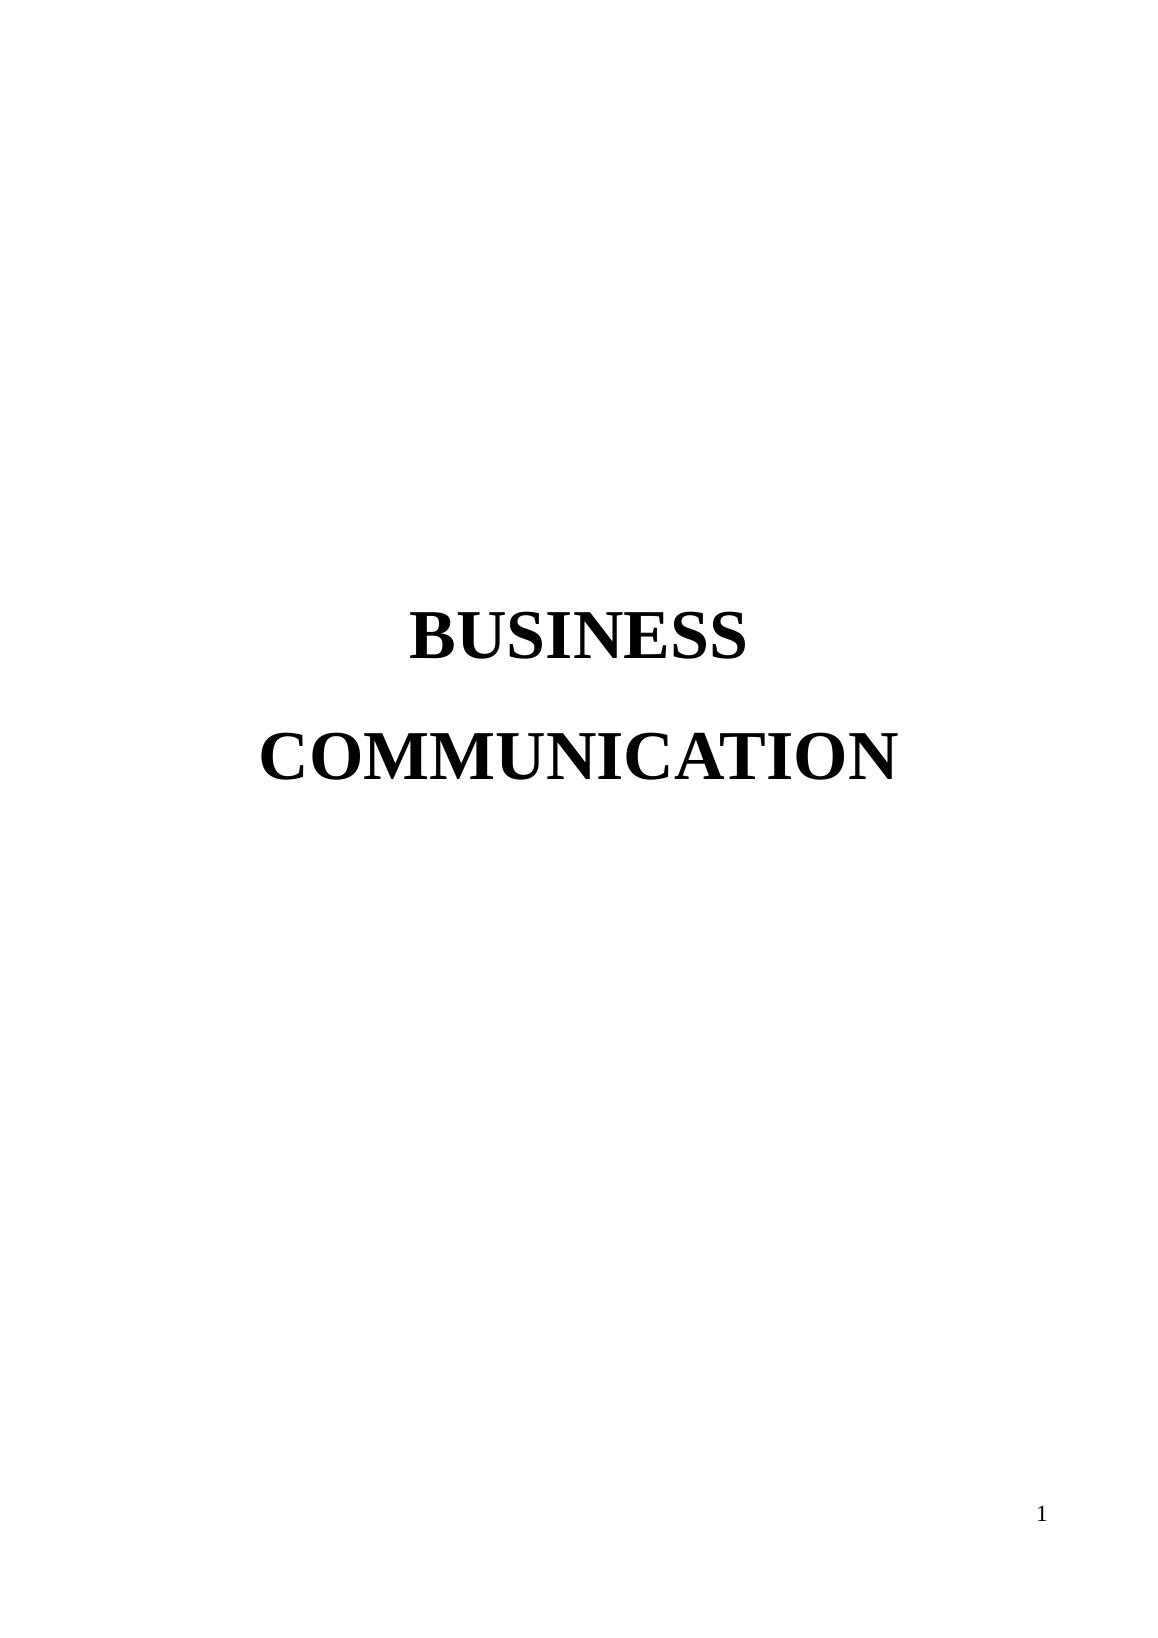 Report on Types of Communication_1